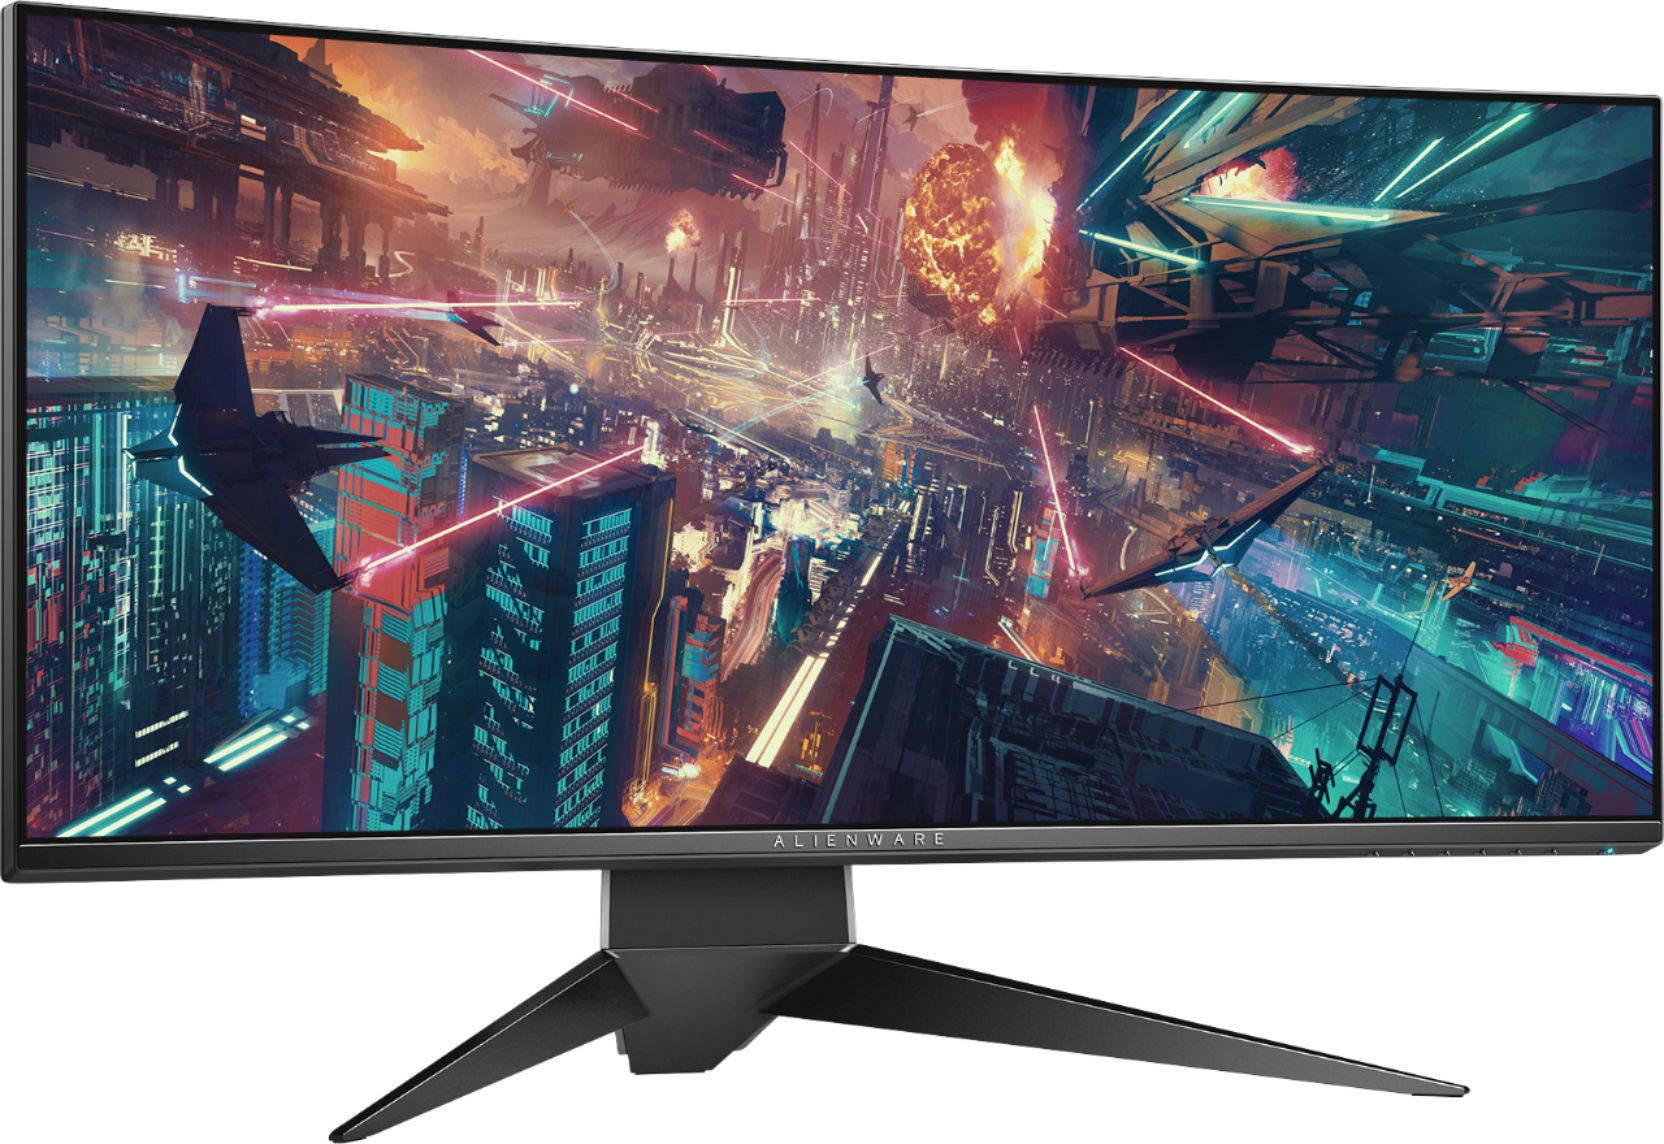 Alienware has new gaming monitors with a built-in headset stand